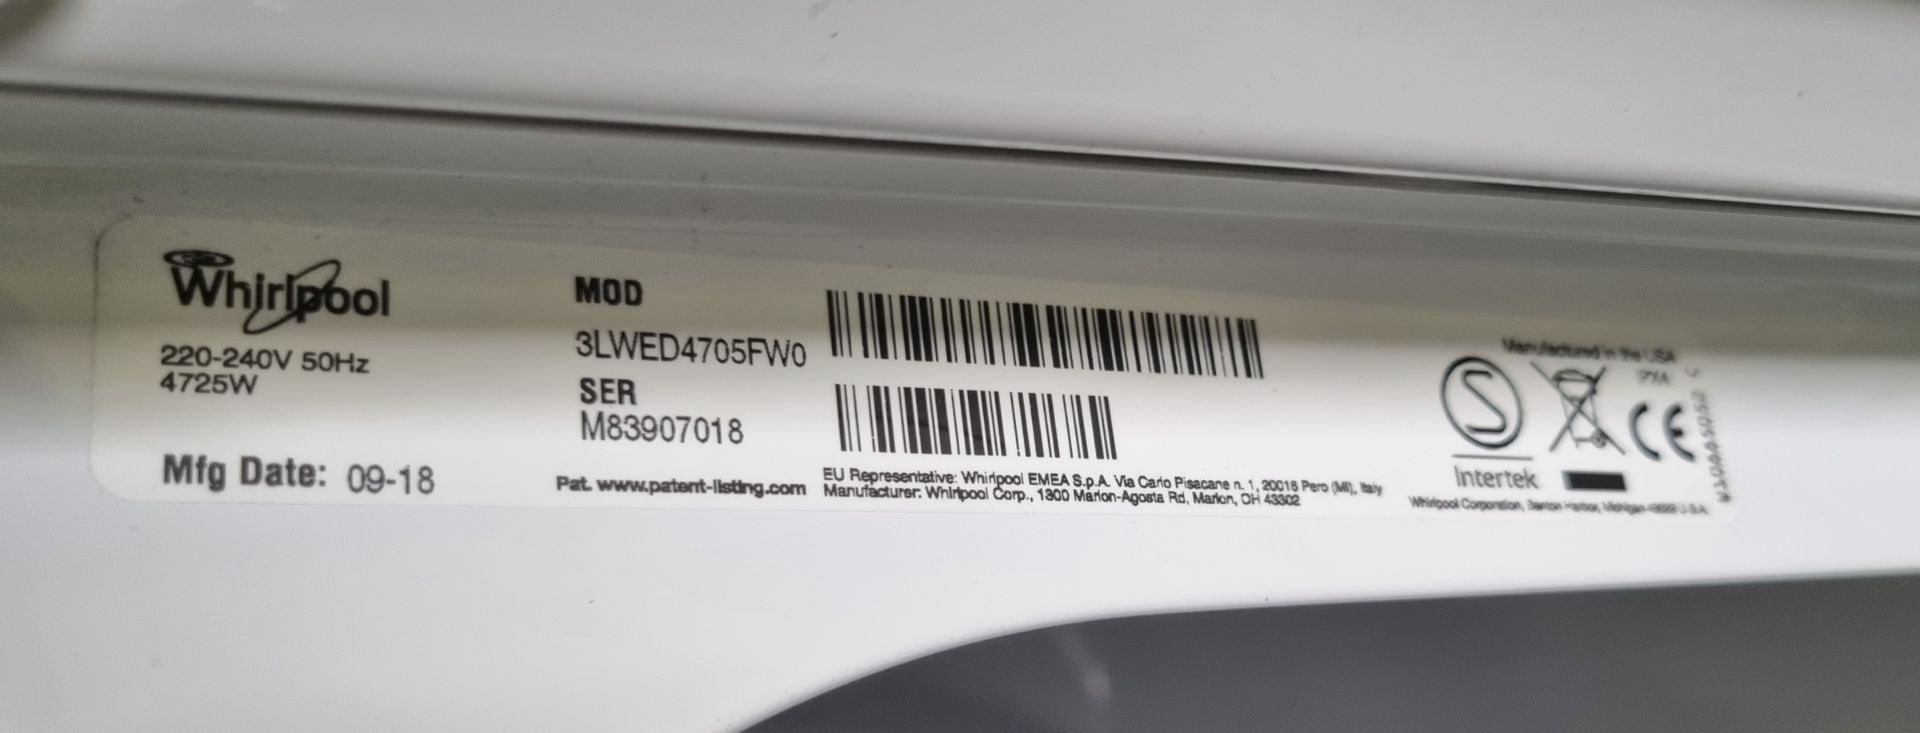 Whirlpool 3LWED4705FW Classic 15kg vented tumble dryer - L 750 x W 650 x H 1070mm - Image 4 of 5